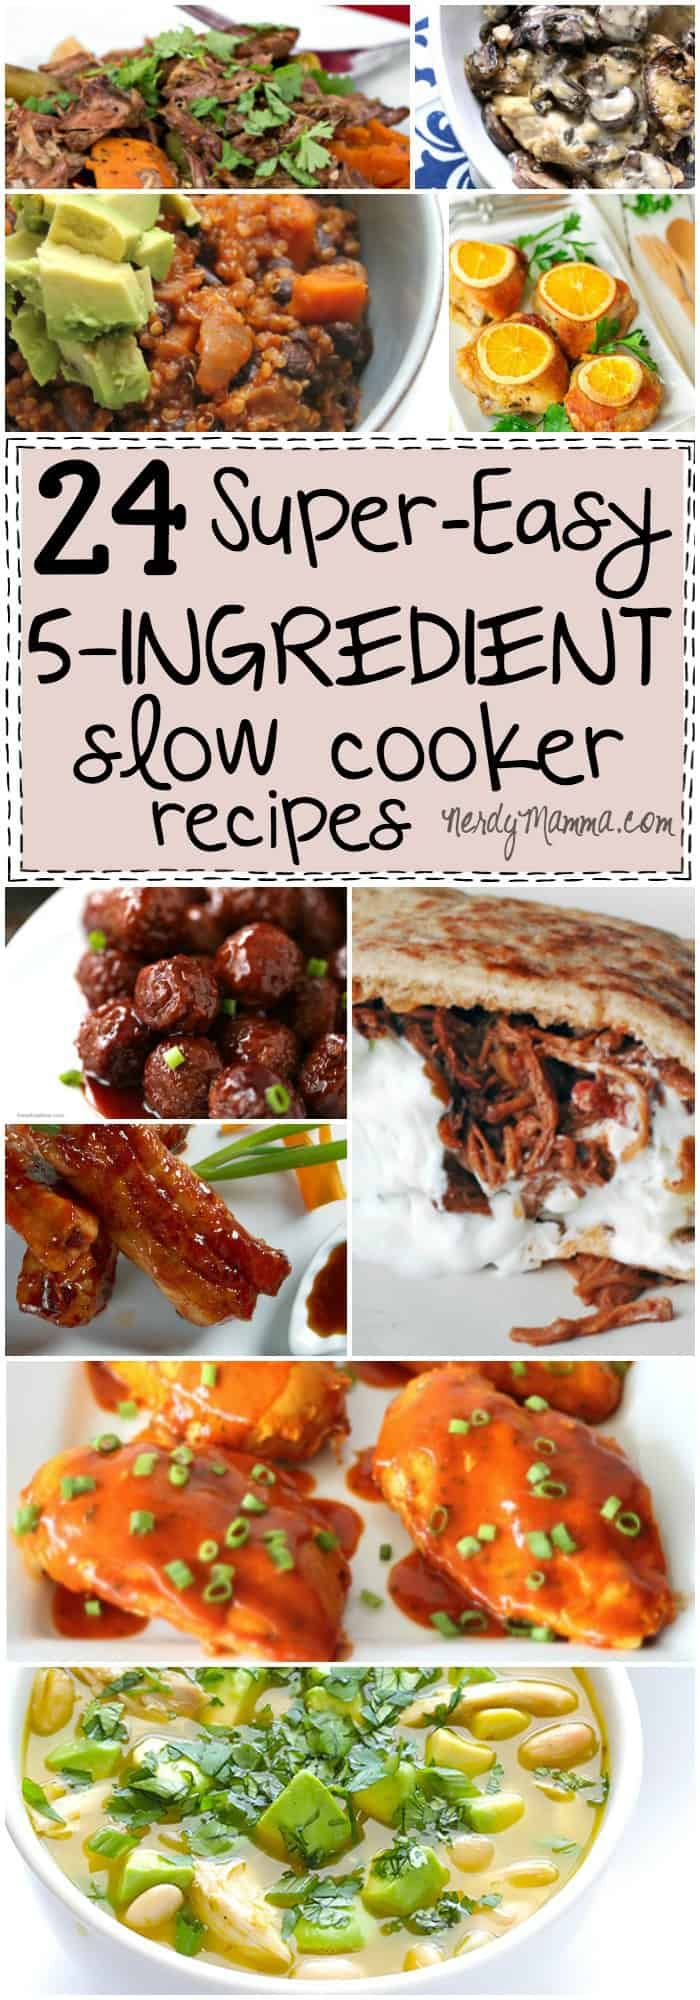 This list of 24 Super-Easy 5-Ingredient Slow Cooker Recipes is so awesome. It's like everything I've ever wanted for dinner. Love it!